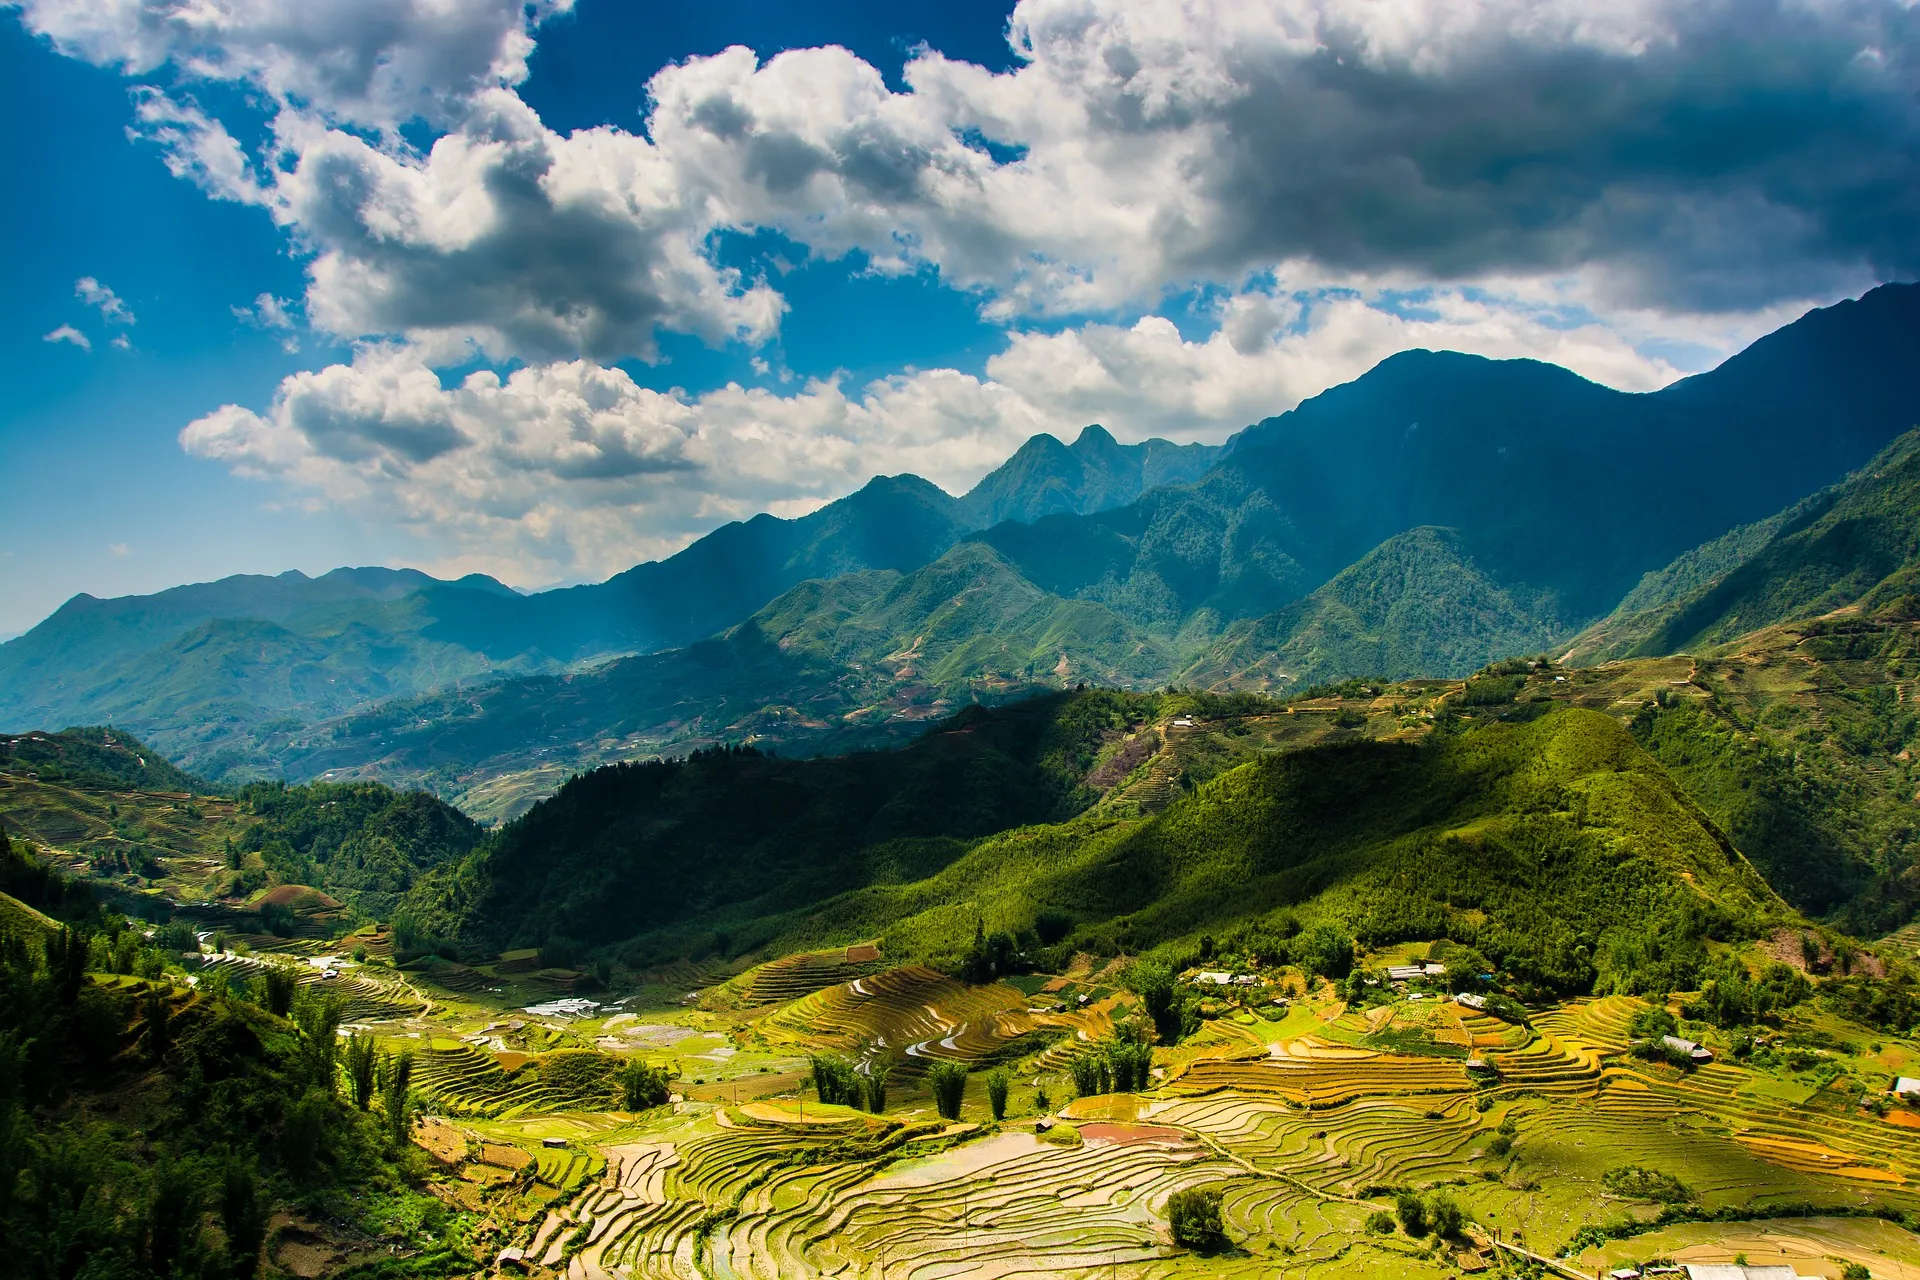 View of mountains and valleys in Sapa Valley